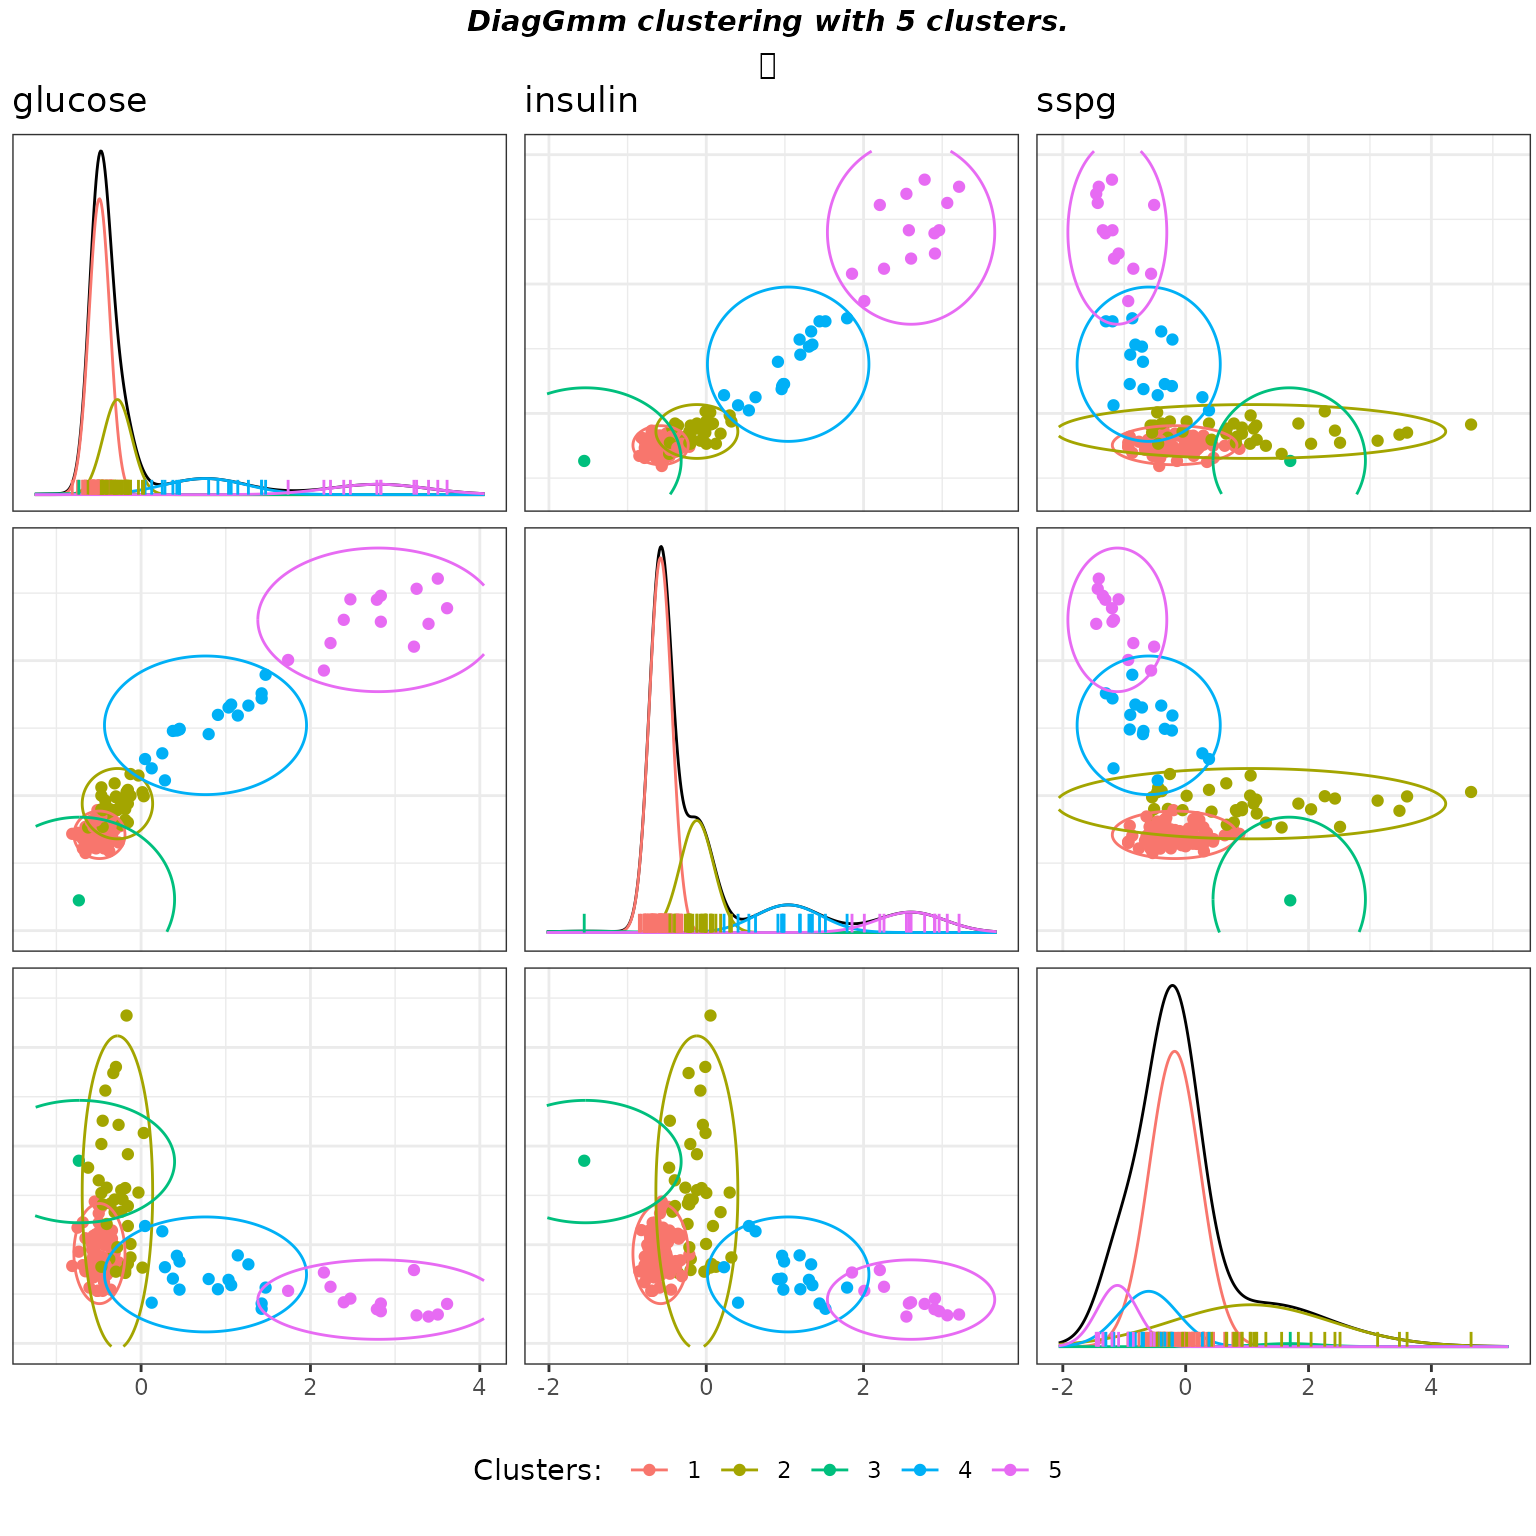 Matrix pairs plots of the Diagonal GMM clustering with default parameters on the diabetes data.